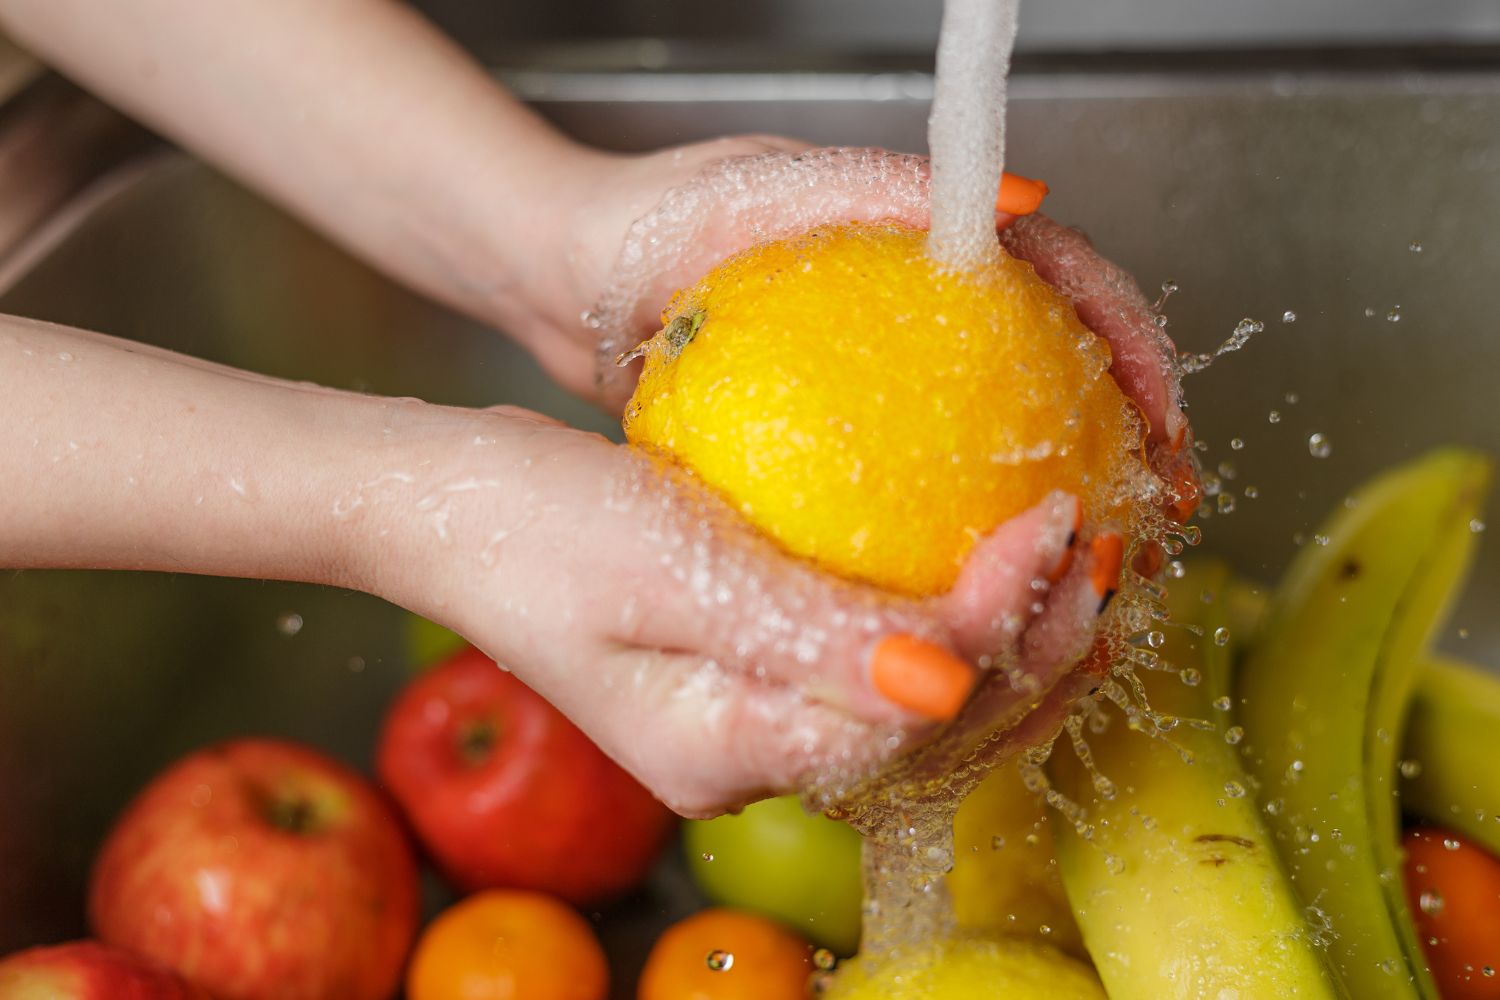 wash the oranges thoroughly to remove any dirt